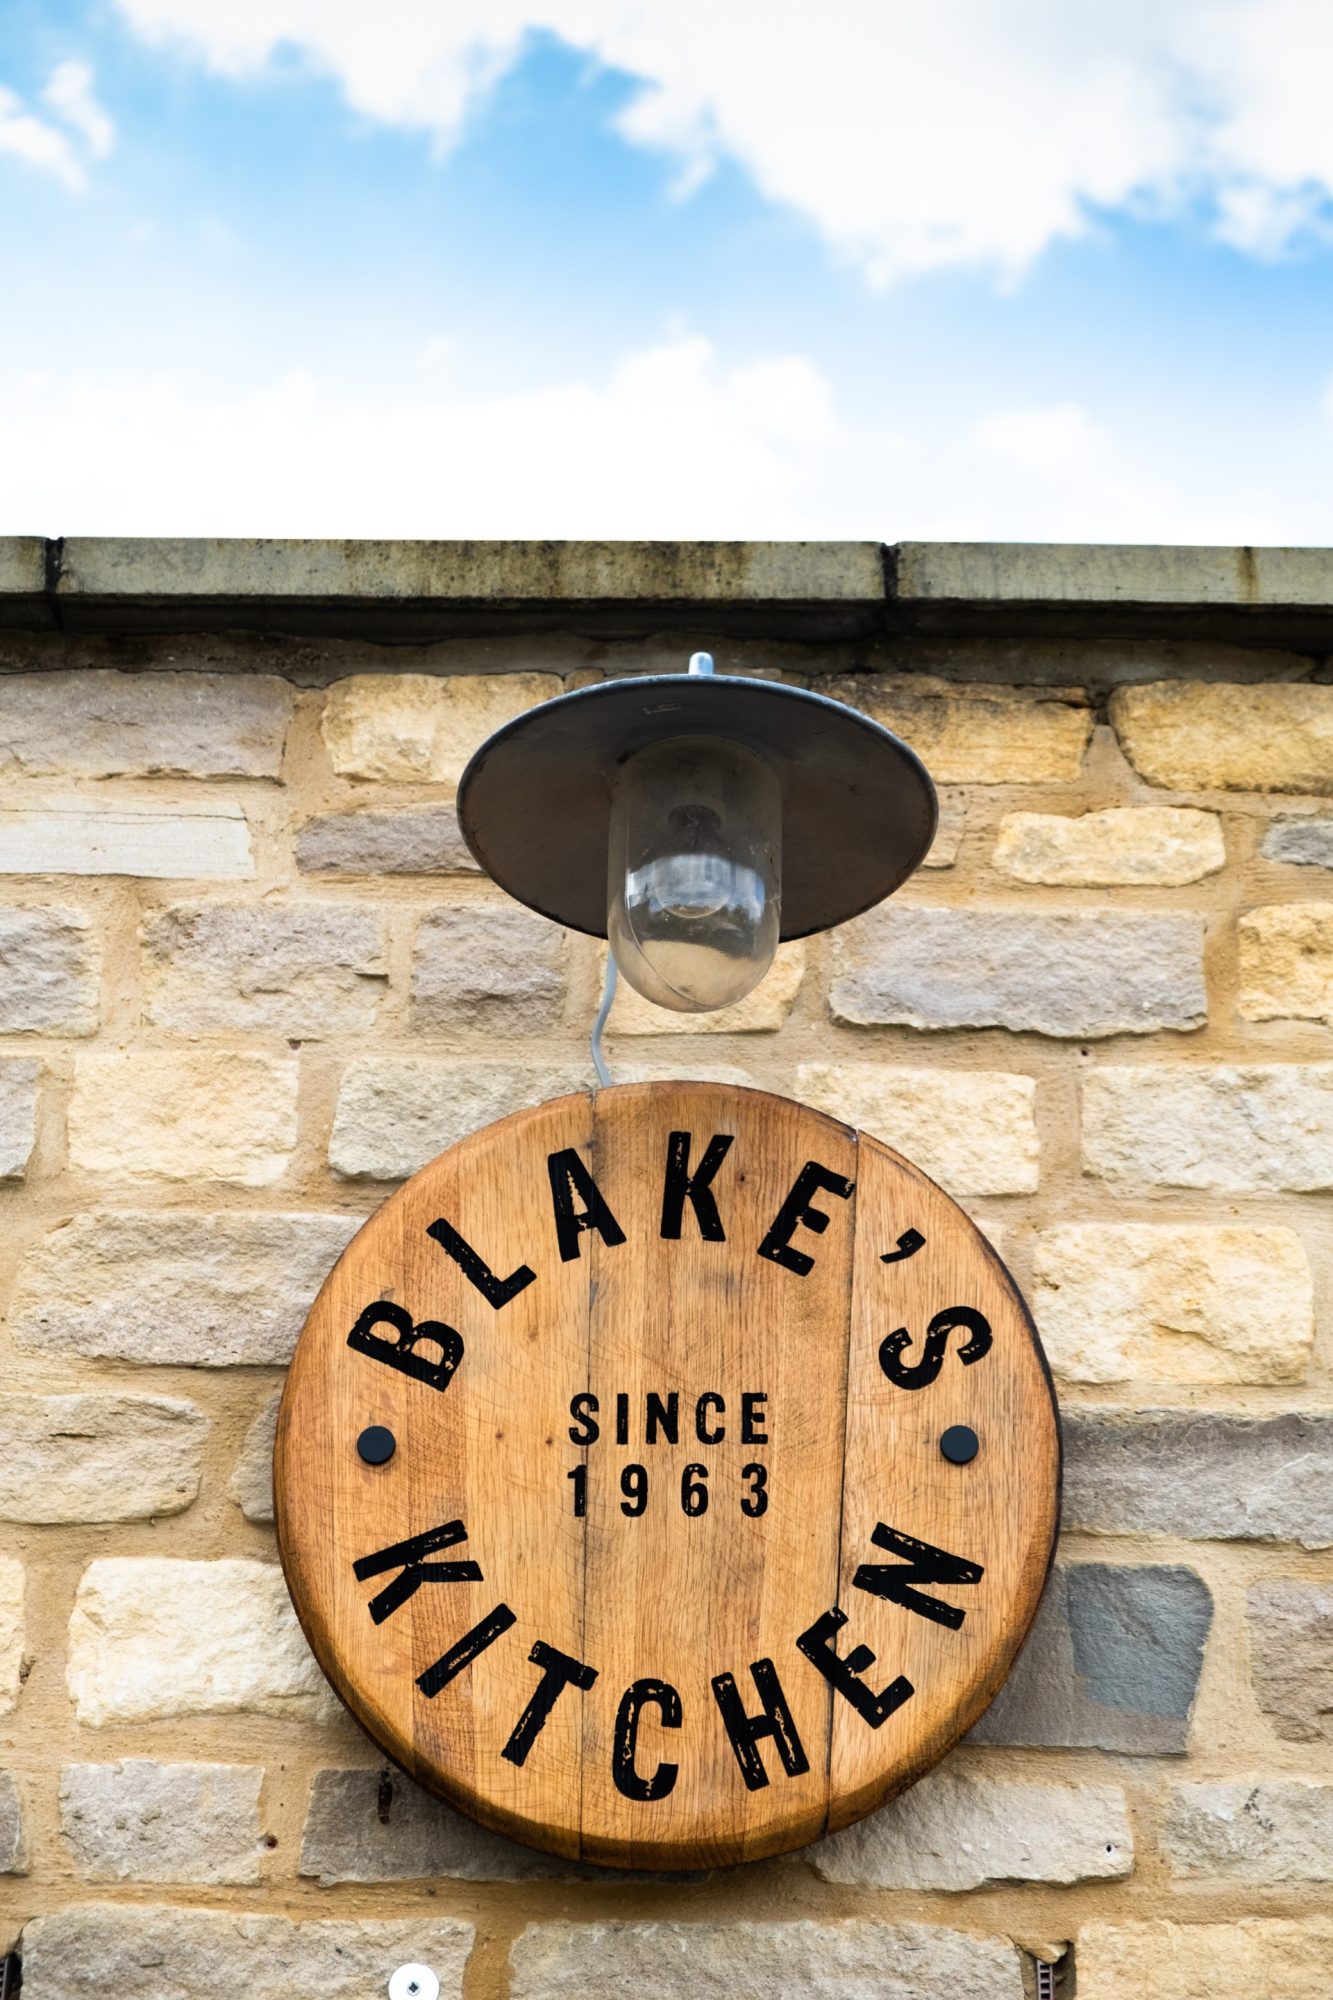 The Blake's Kitchen sign made of wood hanging on the wall